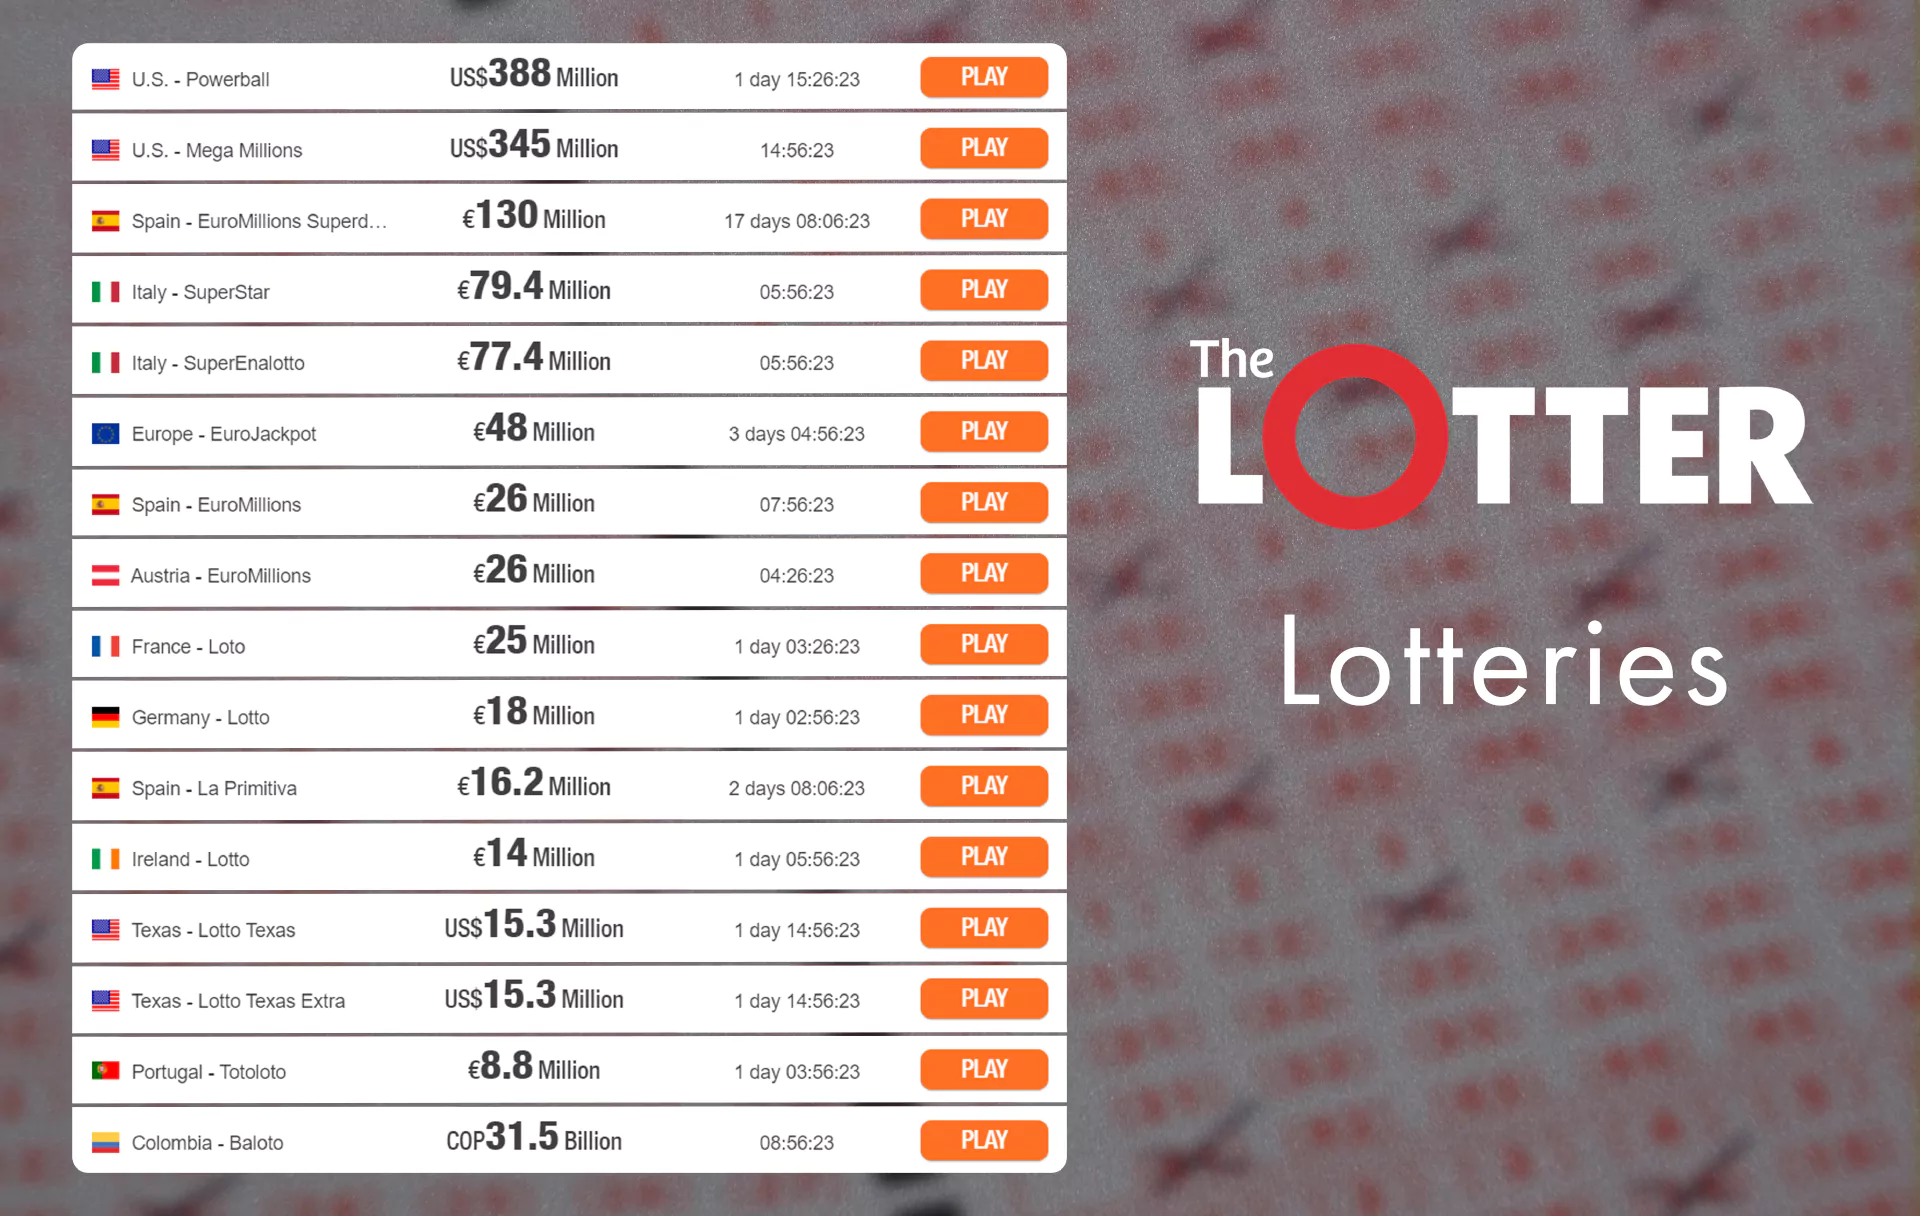 On TheLotter website you can find more than 60 international lotteries.